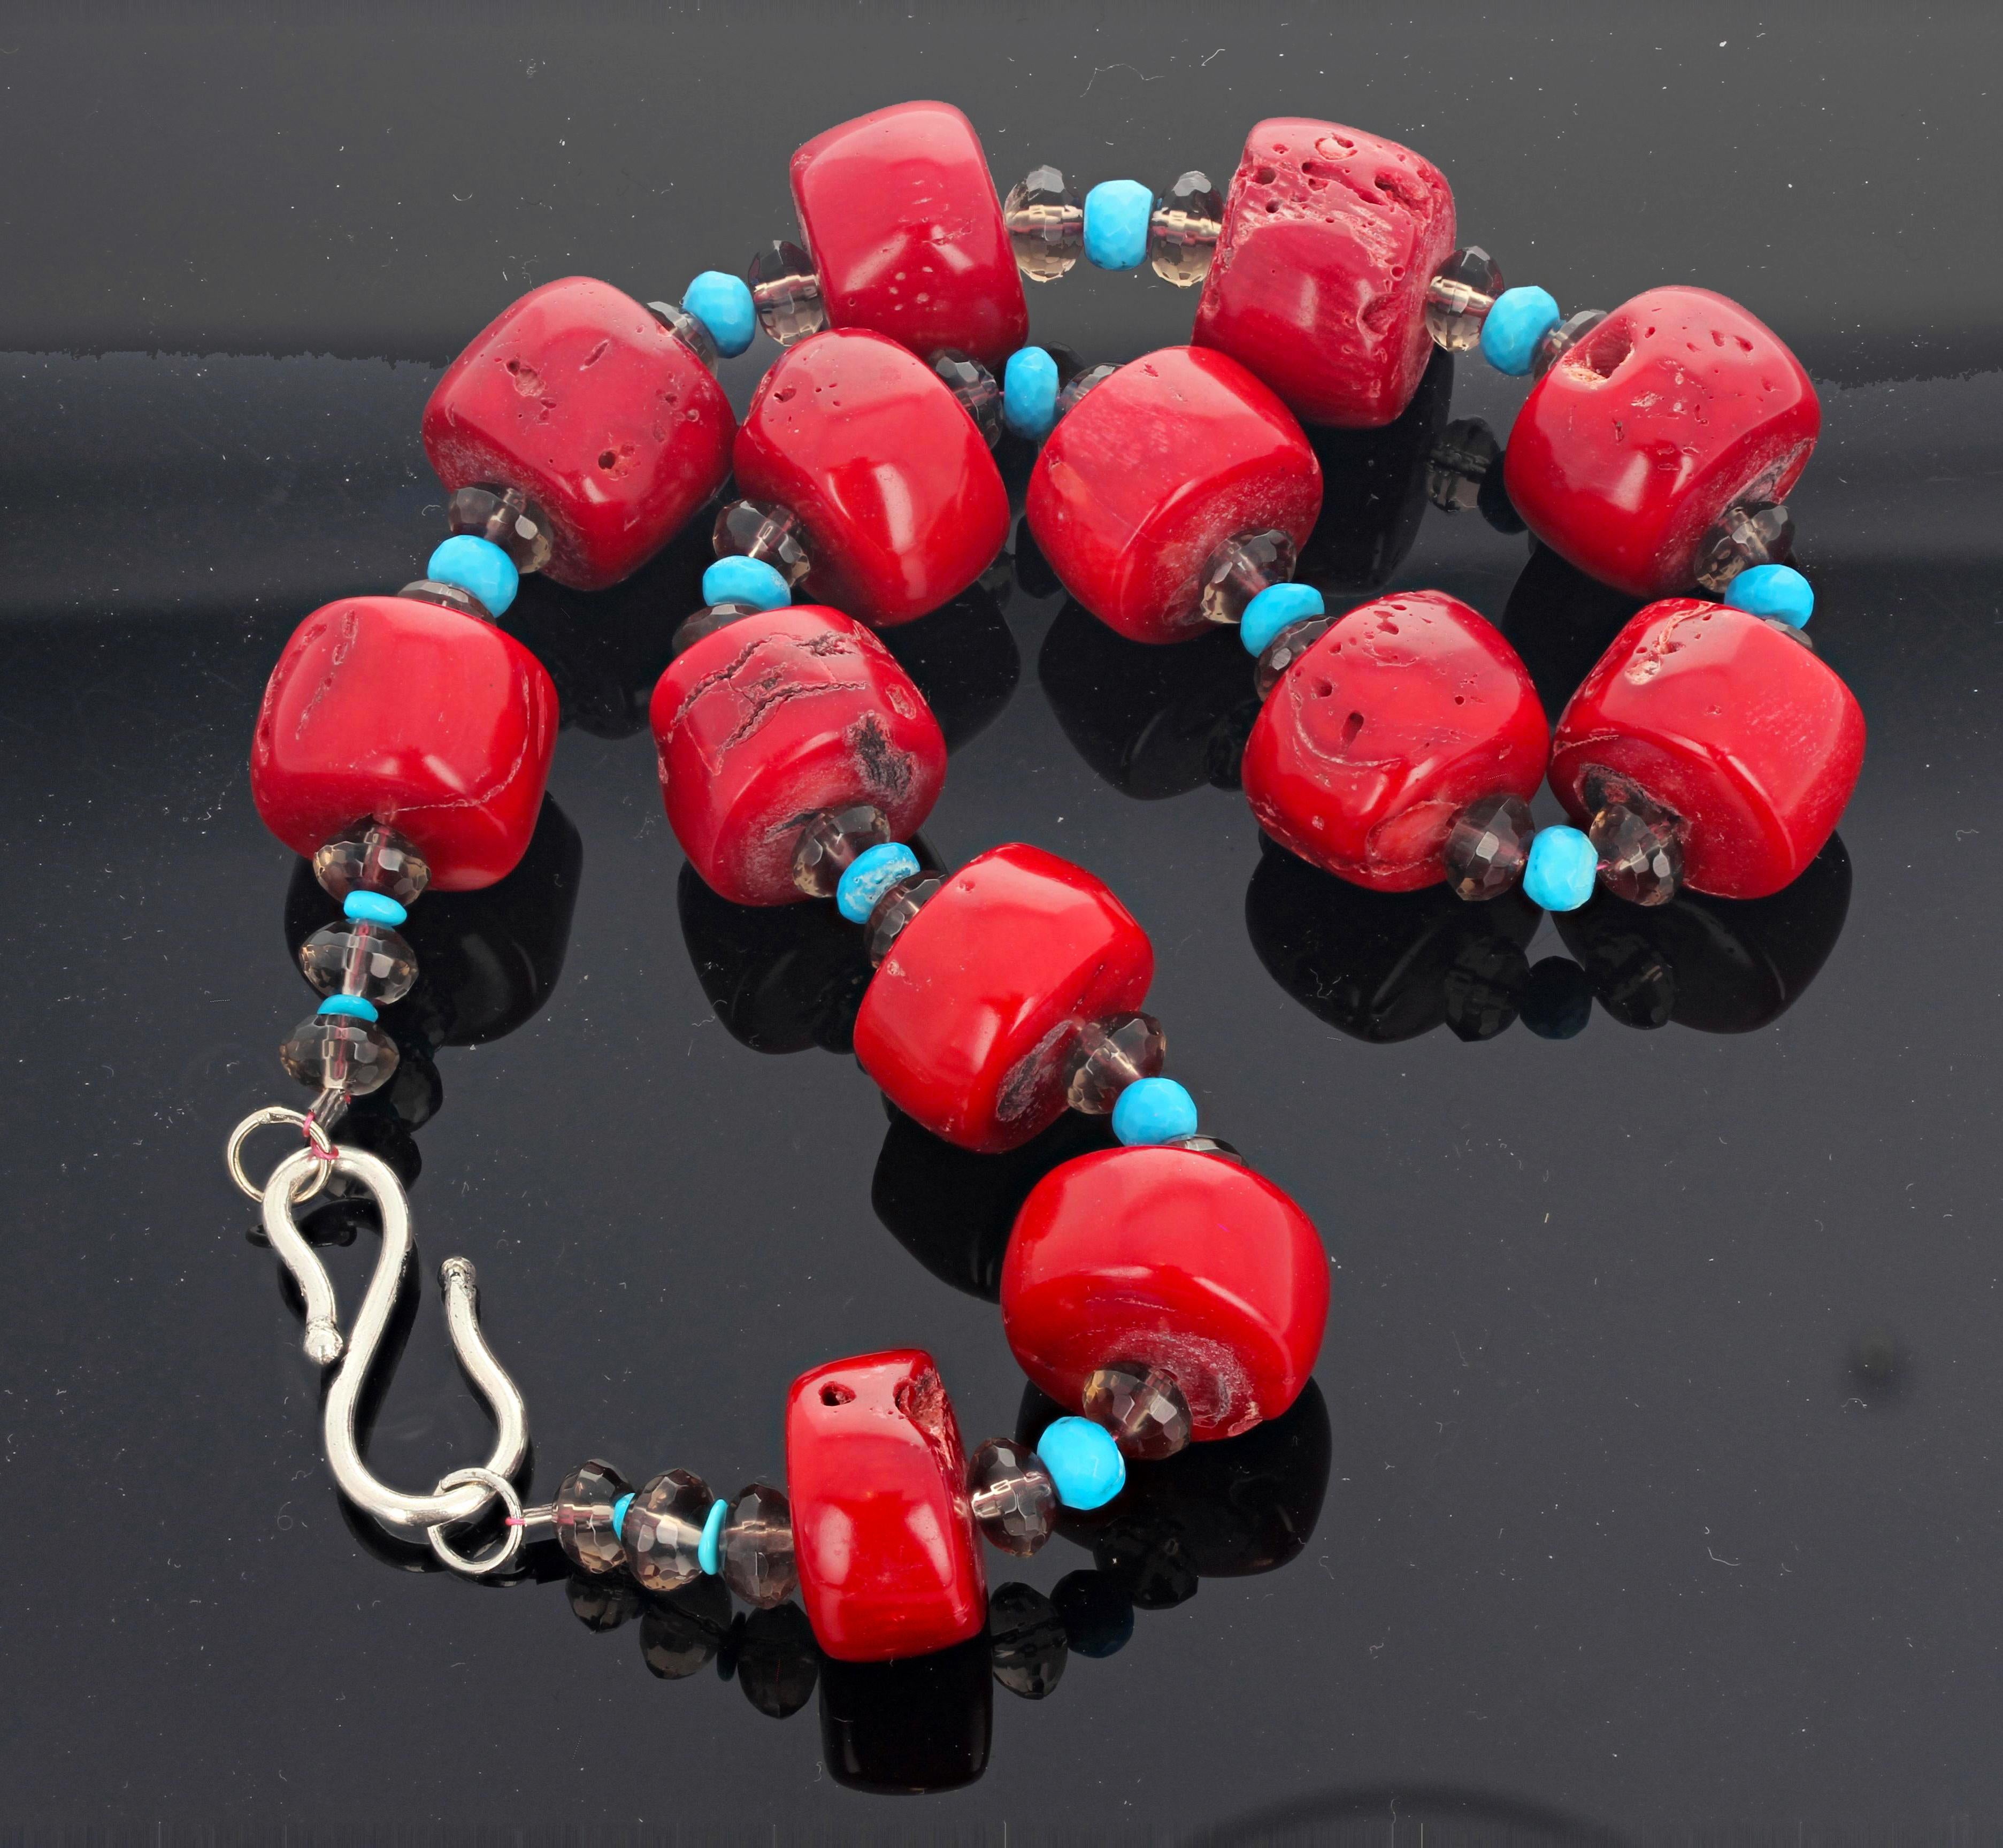 Polished thick coin slices of fascinating natural Bamboo Coral (approximately 20 mm round) delightfully enhanced with gem cut  sparkling rondels of Smoky Quartz and natural Blue Turquoise set in a 16.5 inch long necklace with a silver hook clasp.  